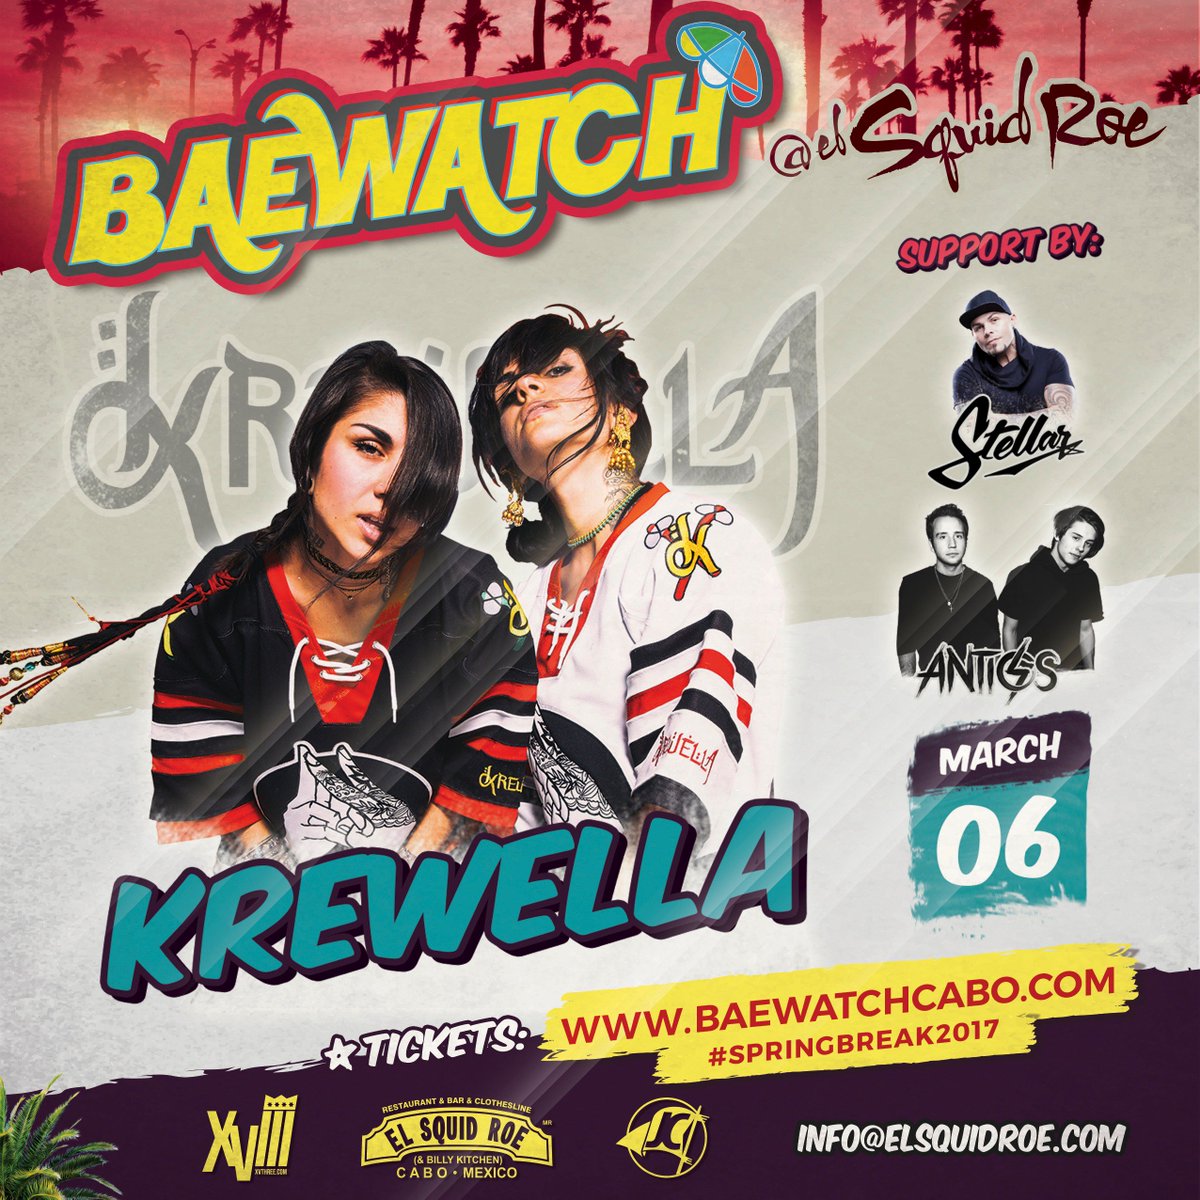 Spring Break Krew!! Come party with us in Cabo on 3/6 🌴🌴 tix: baewatchcabo.com https://t.co/PQuWOTQAvc